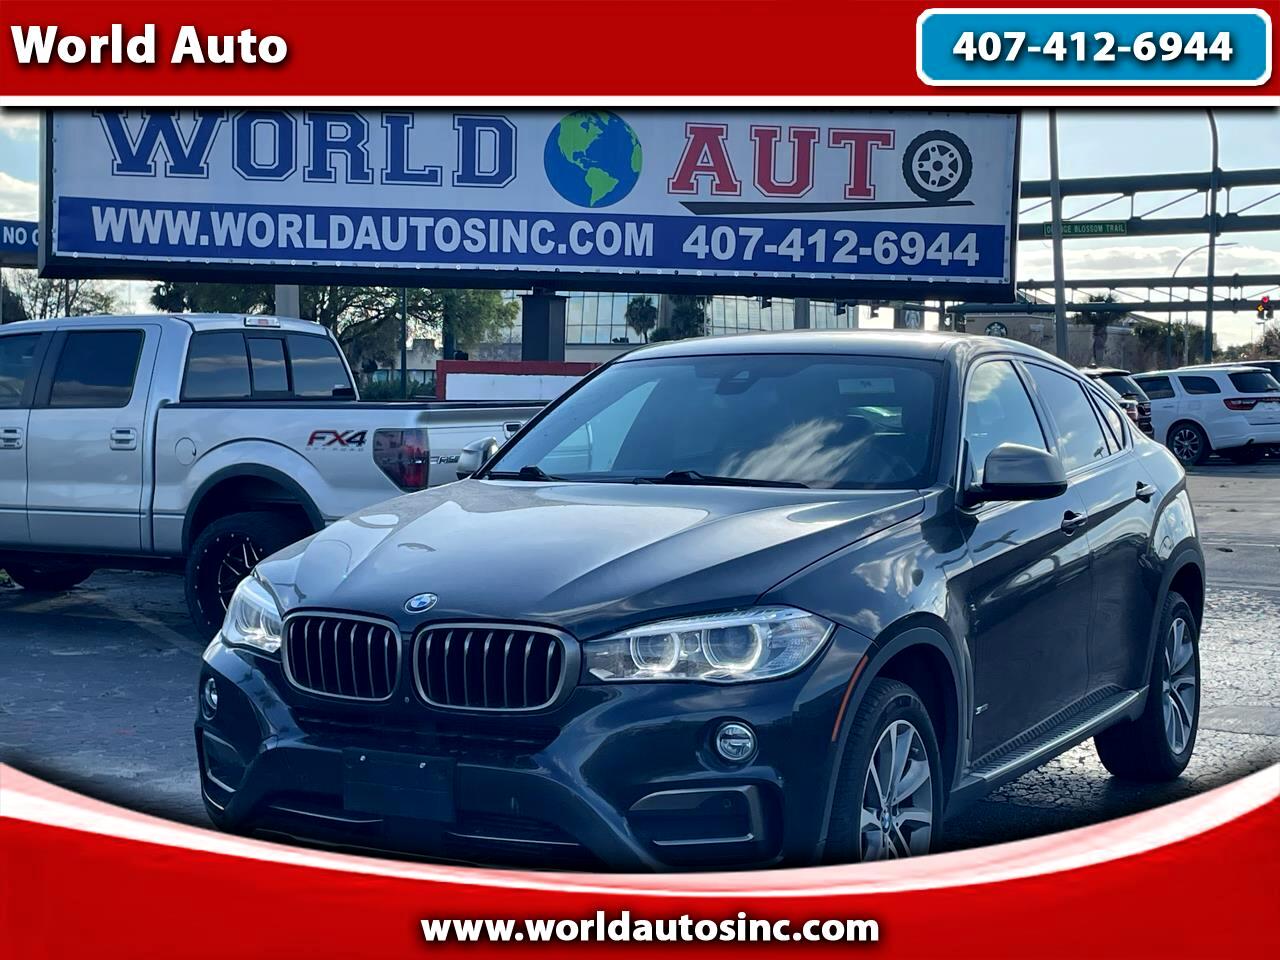 BMW X6 sDrive35i Sports Activity Coupe 2017